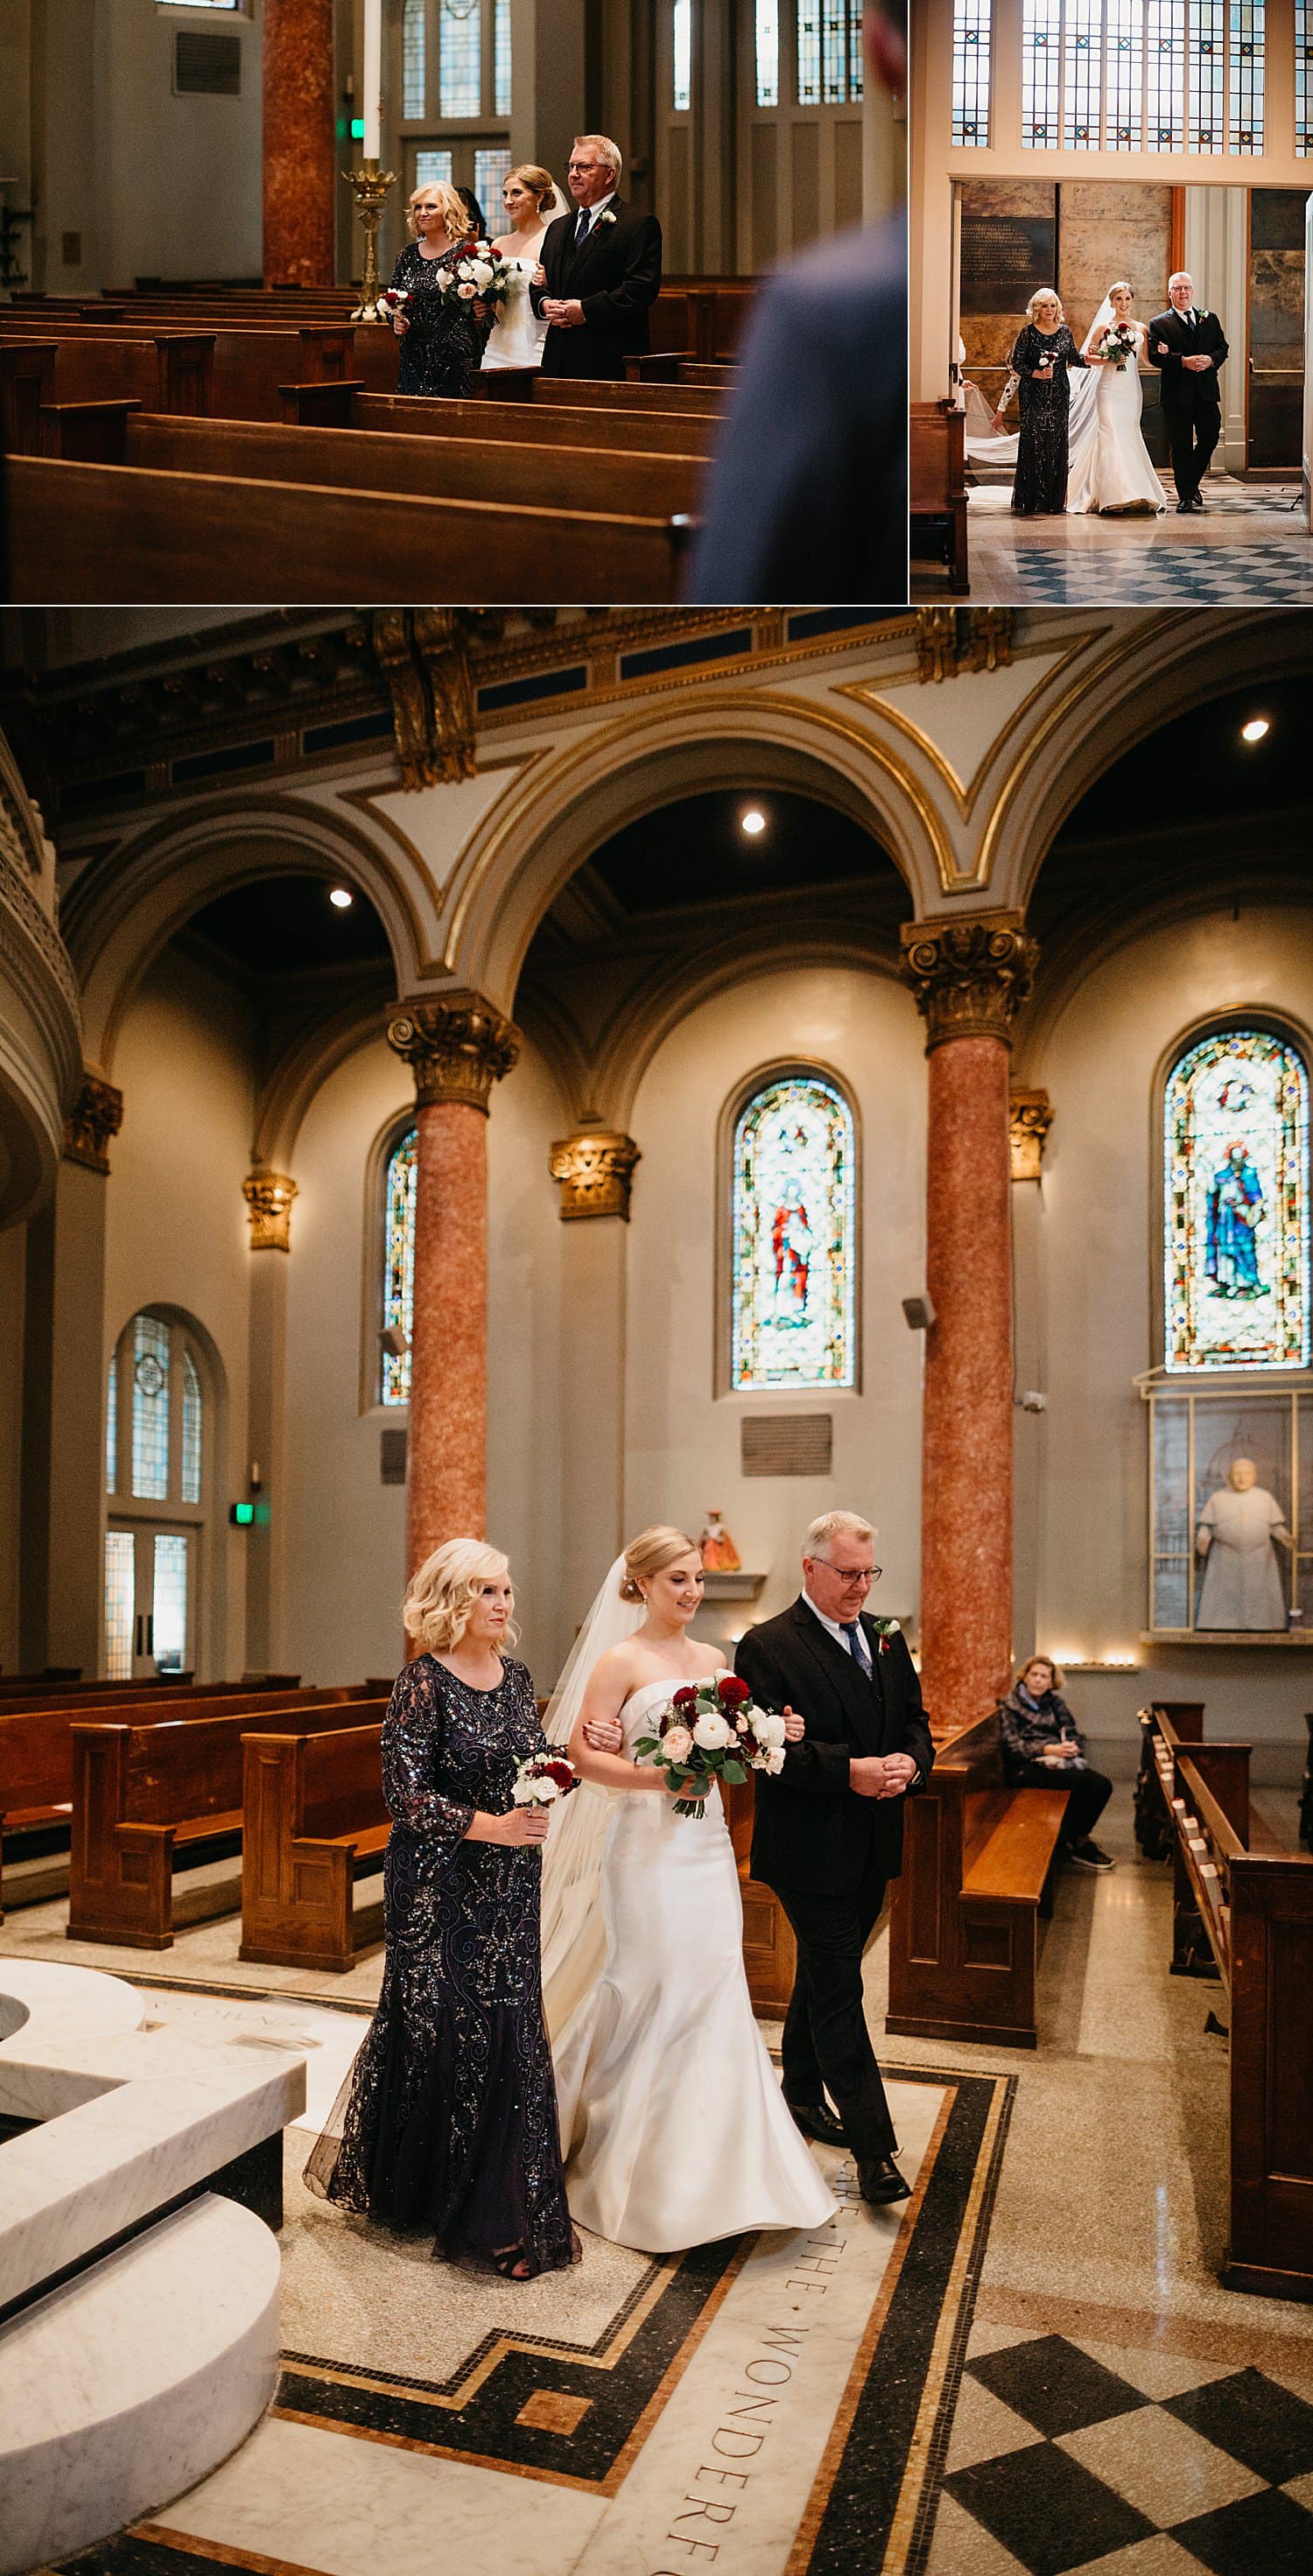 bride walking down the aisle with her parents at St James Cathedral during her Catholic Ceremony wedding 415 Westlake Wedding by Marcela Pulido Seattle Wedding Photographer